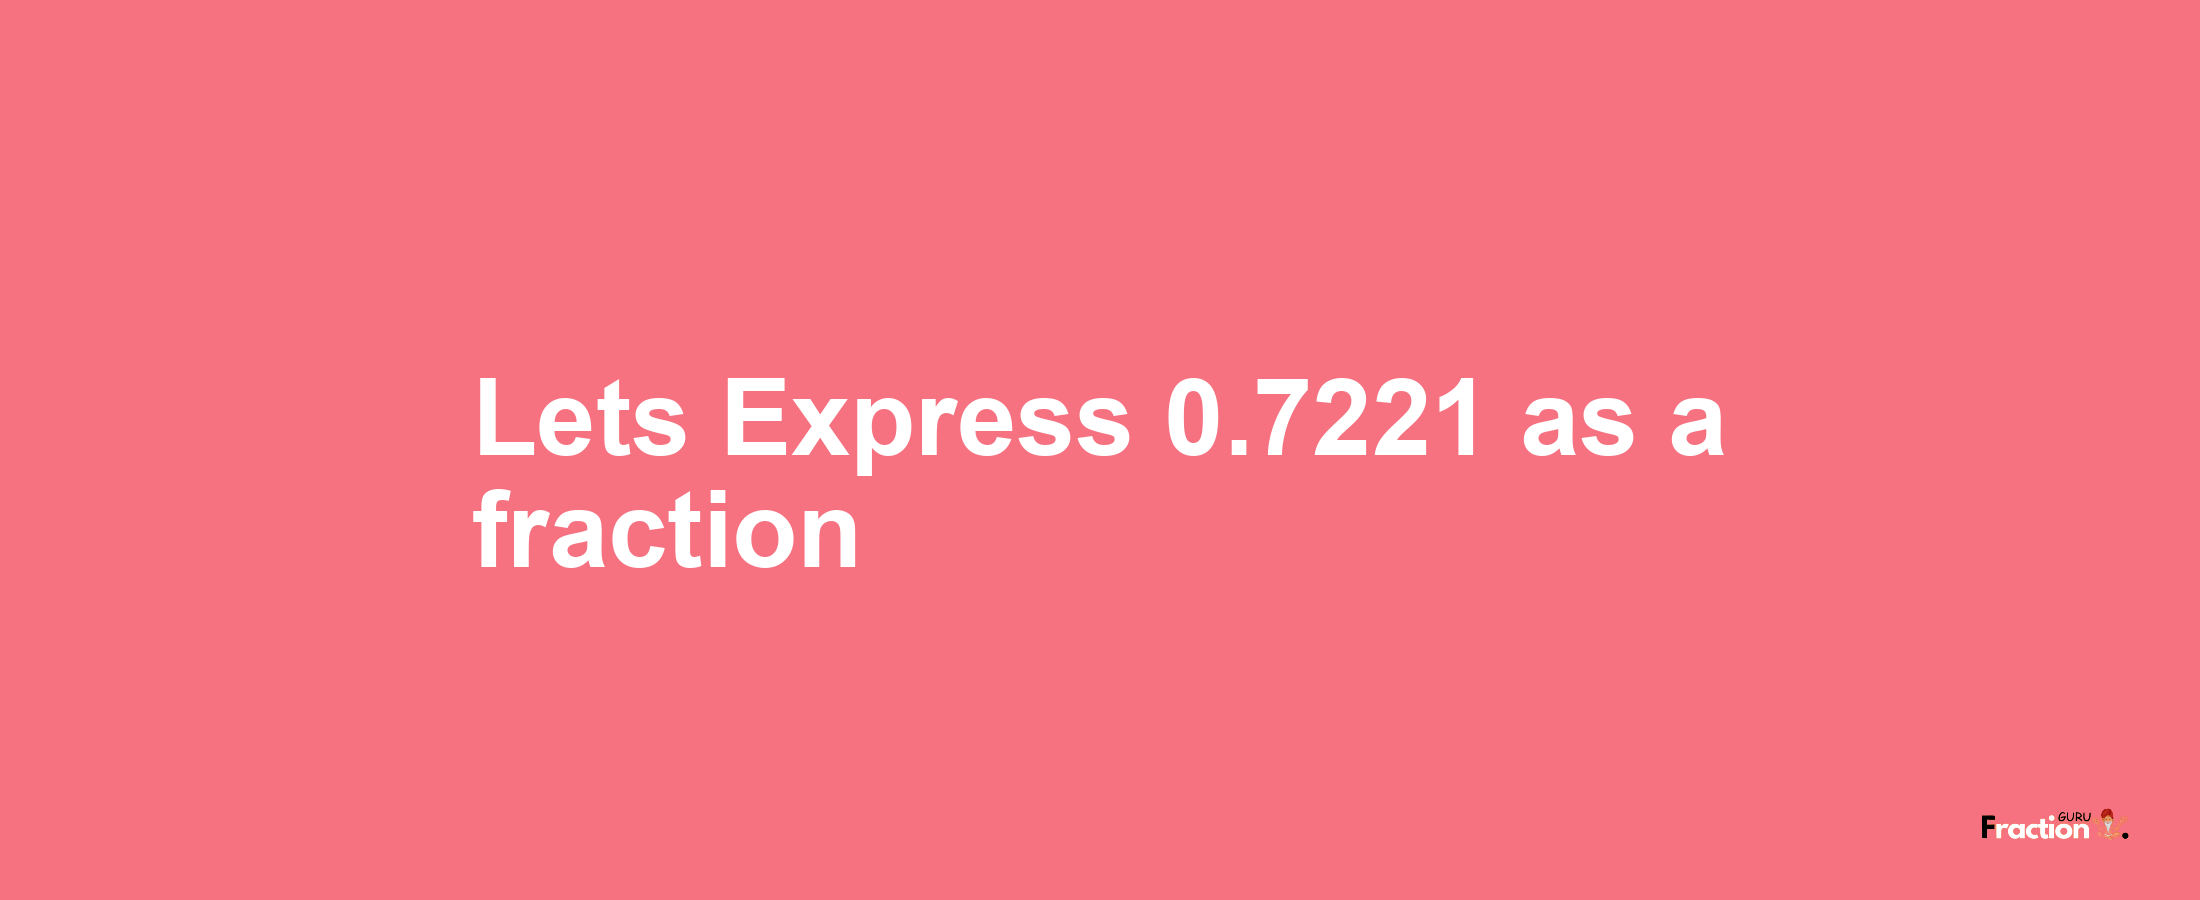 Lets Express 0.7221 as afraction